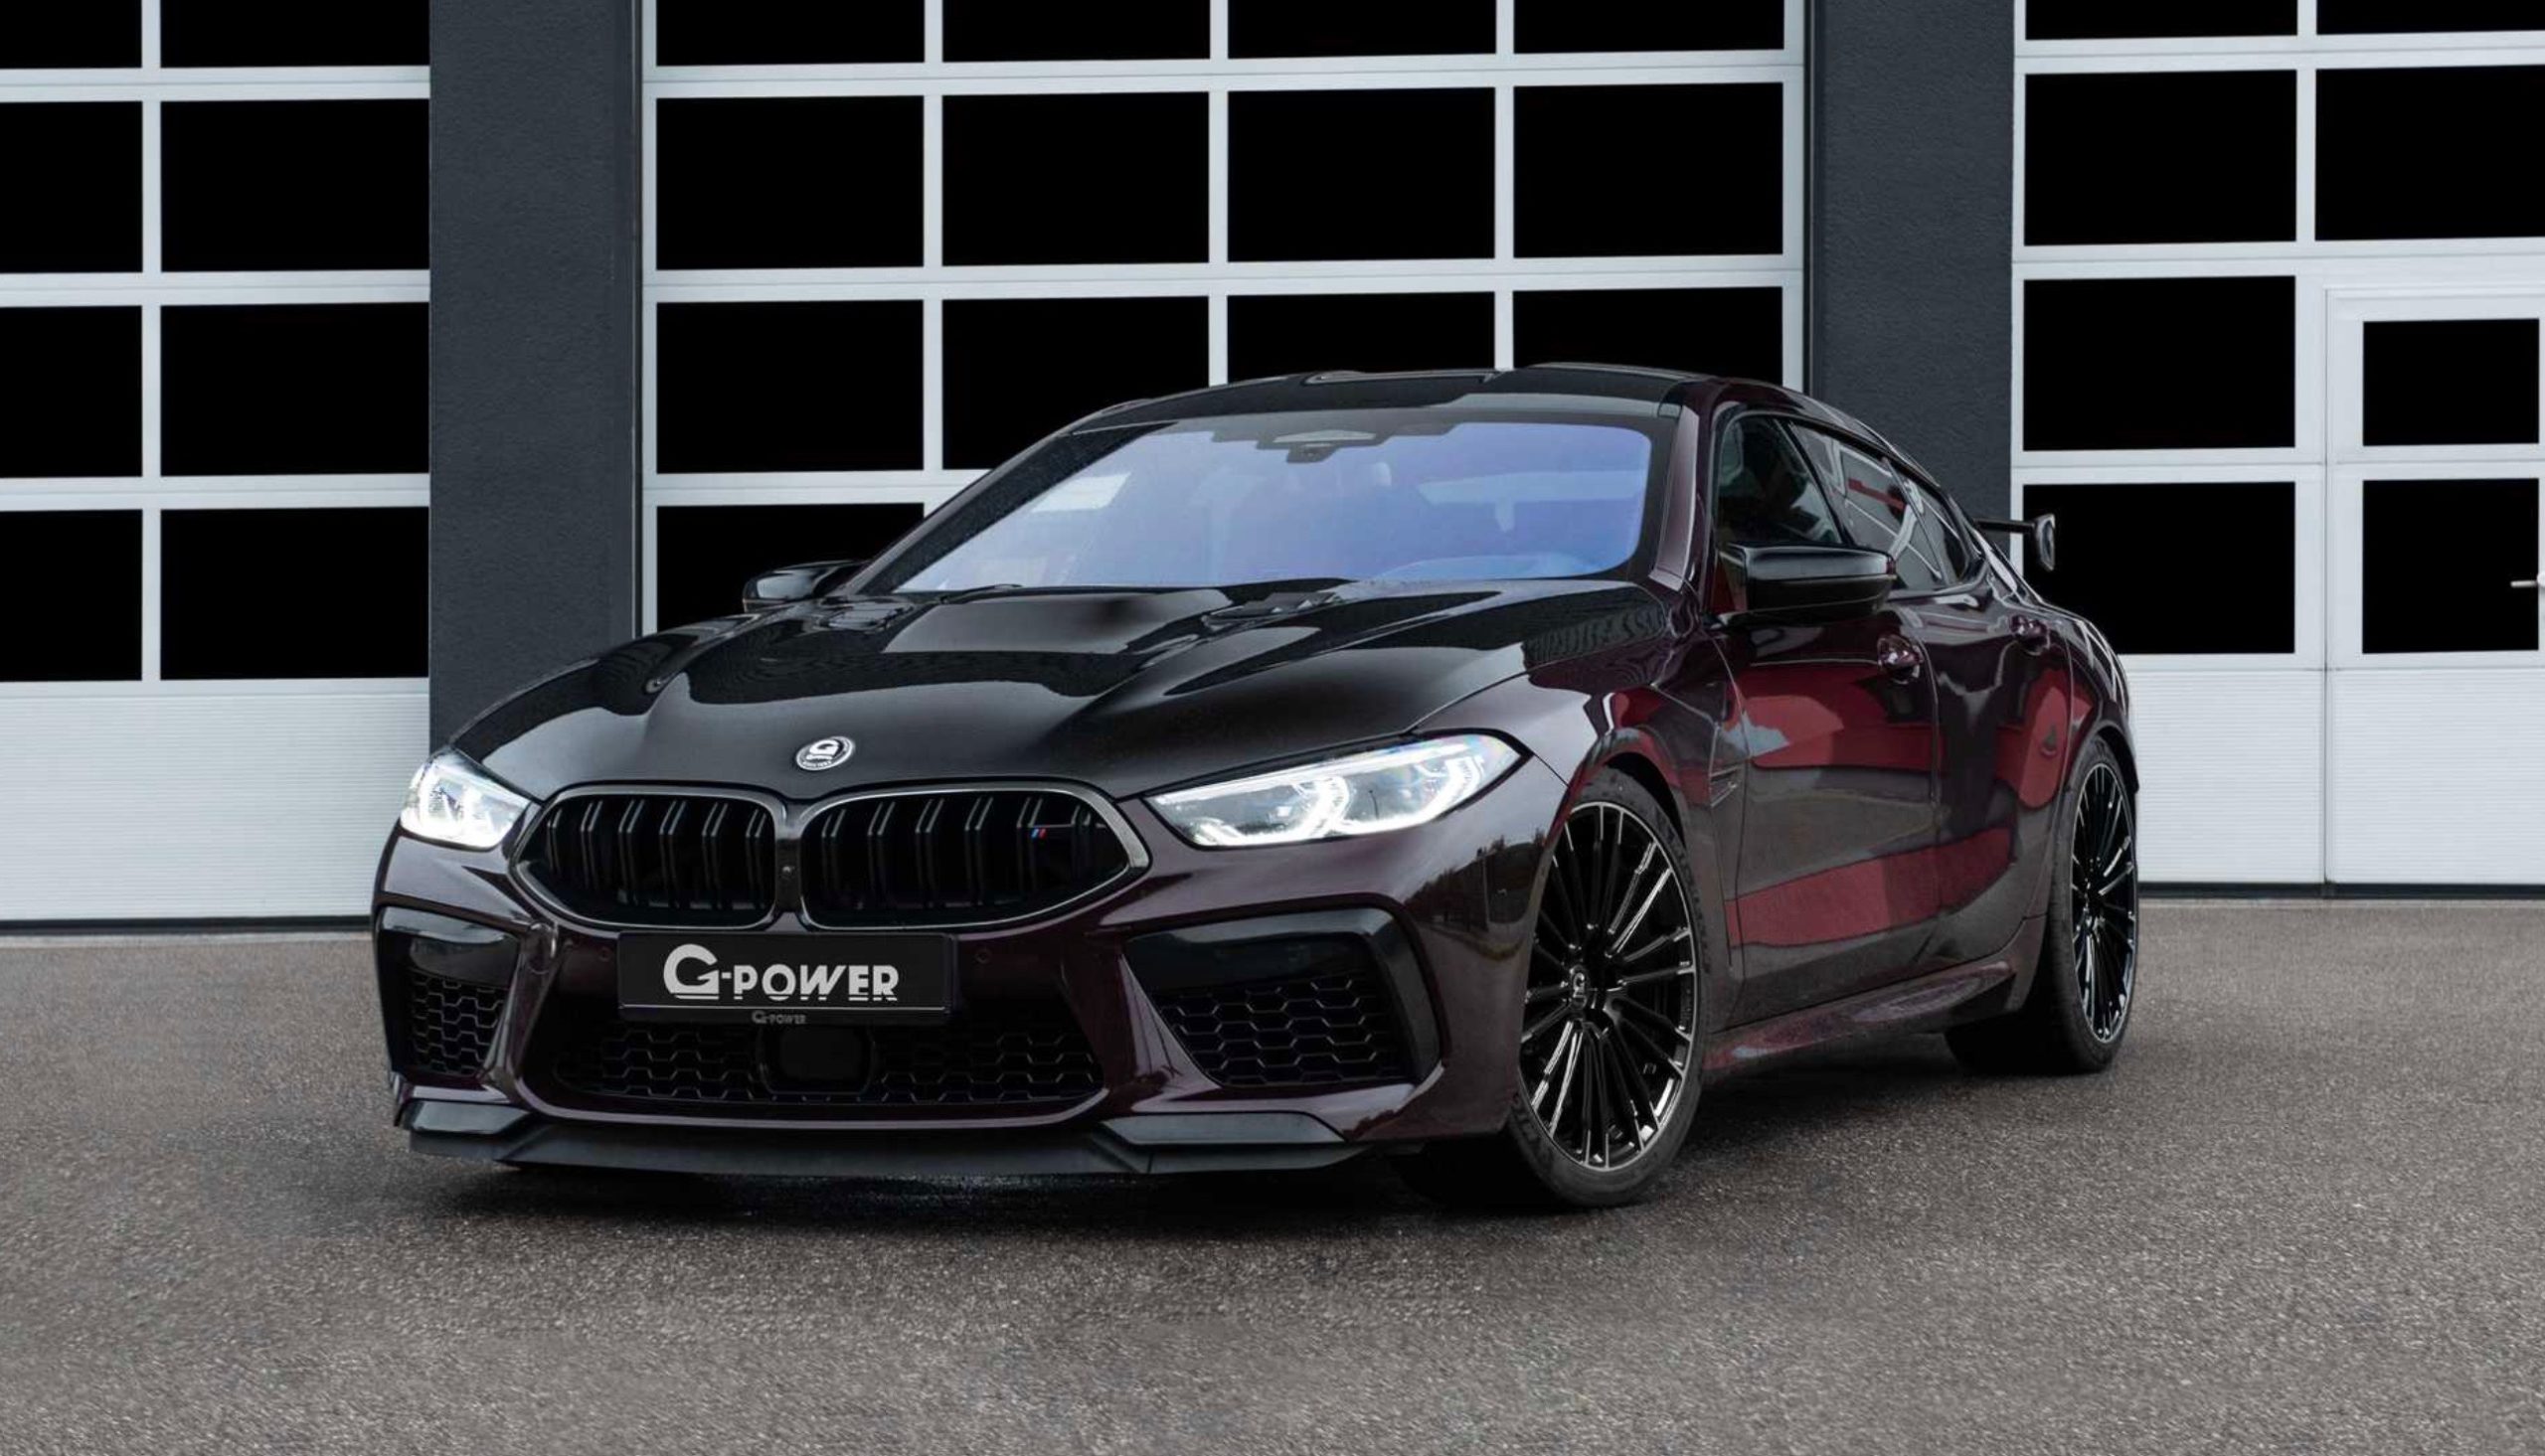 G-Power announces upgrade kit for BMW M8 Grand Coupe, 671kW